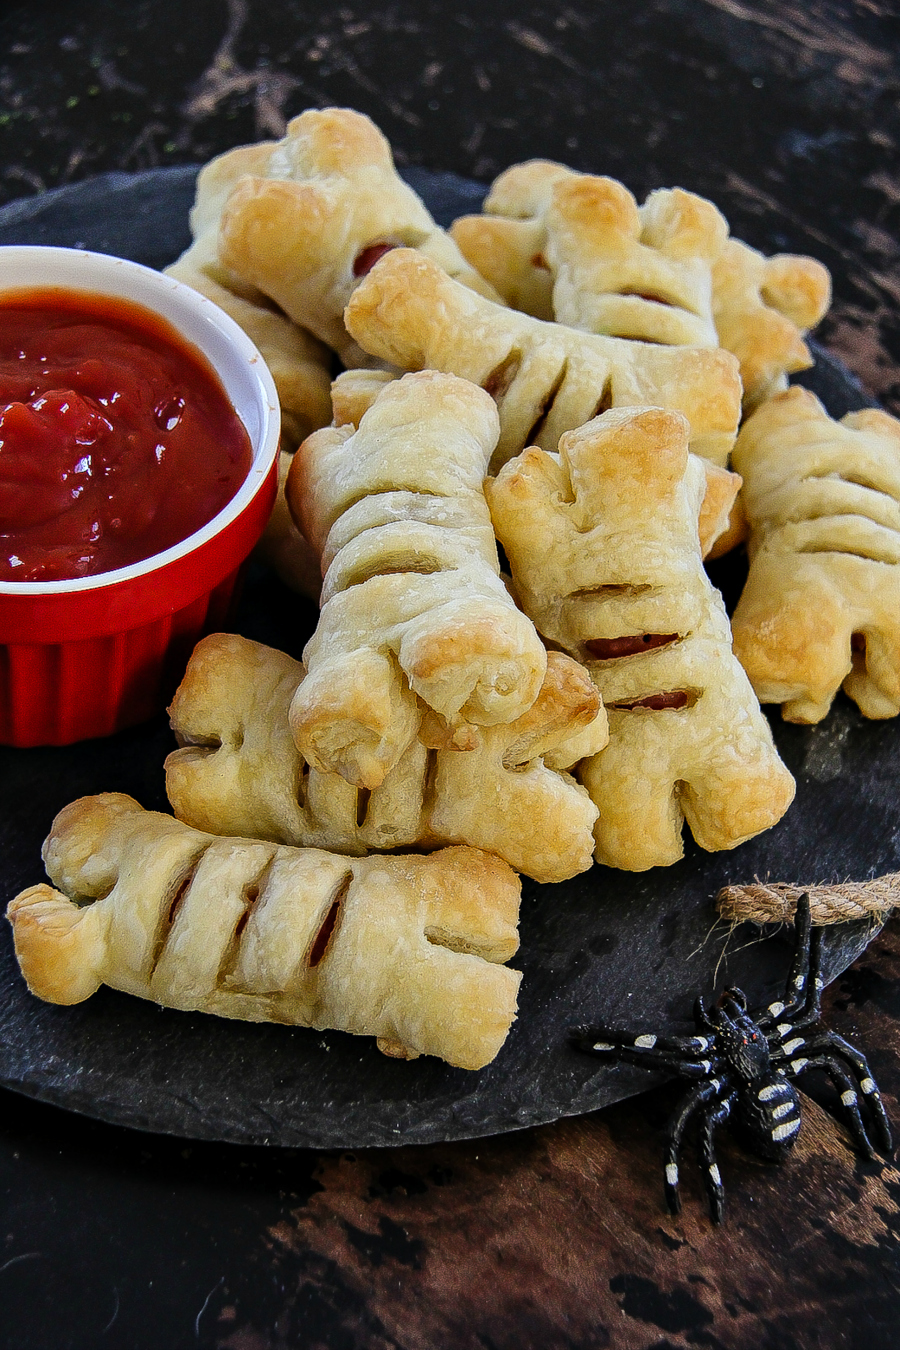 Best Halloween food ideas for parties. Bones made out of Lit'l Smokies and pastry.